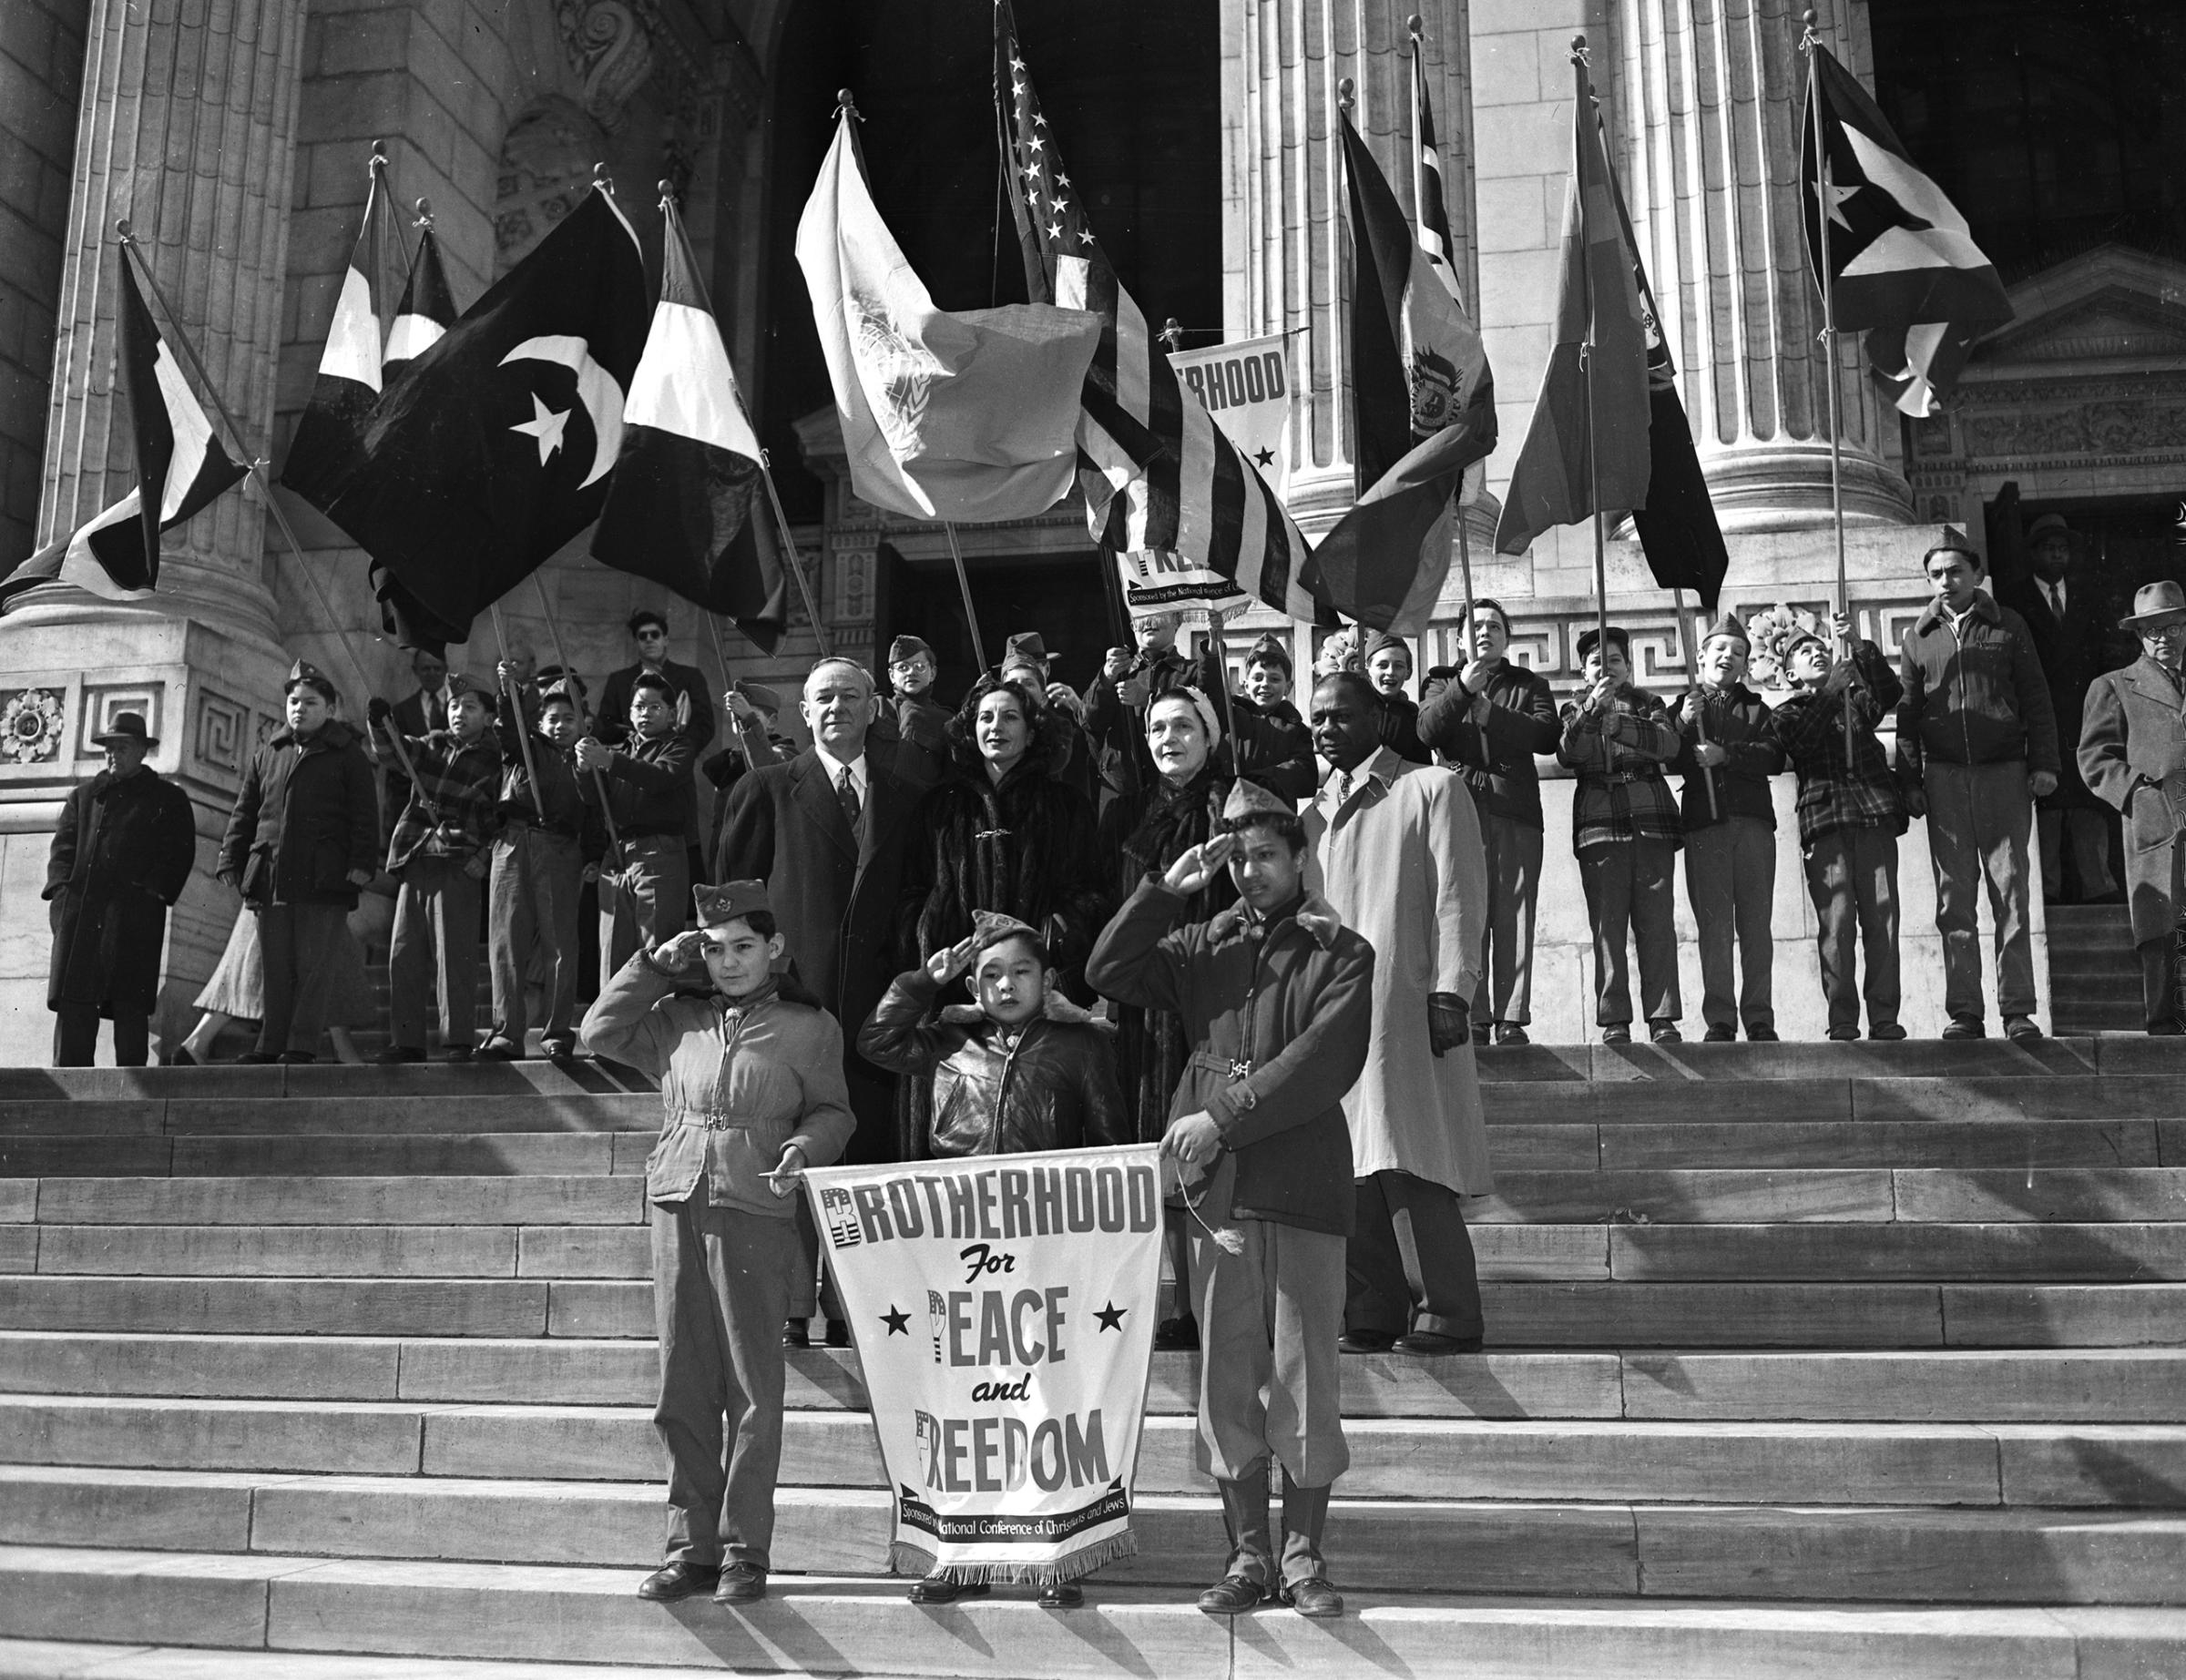 Boy Scouts of various Manhattan troops salute with brotherhood week banner in front of a public library. 1958.